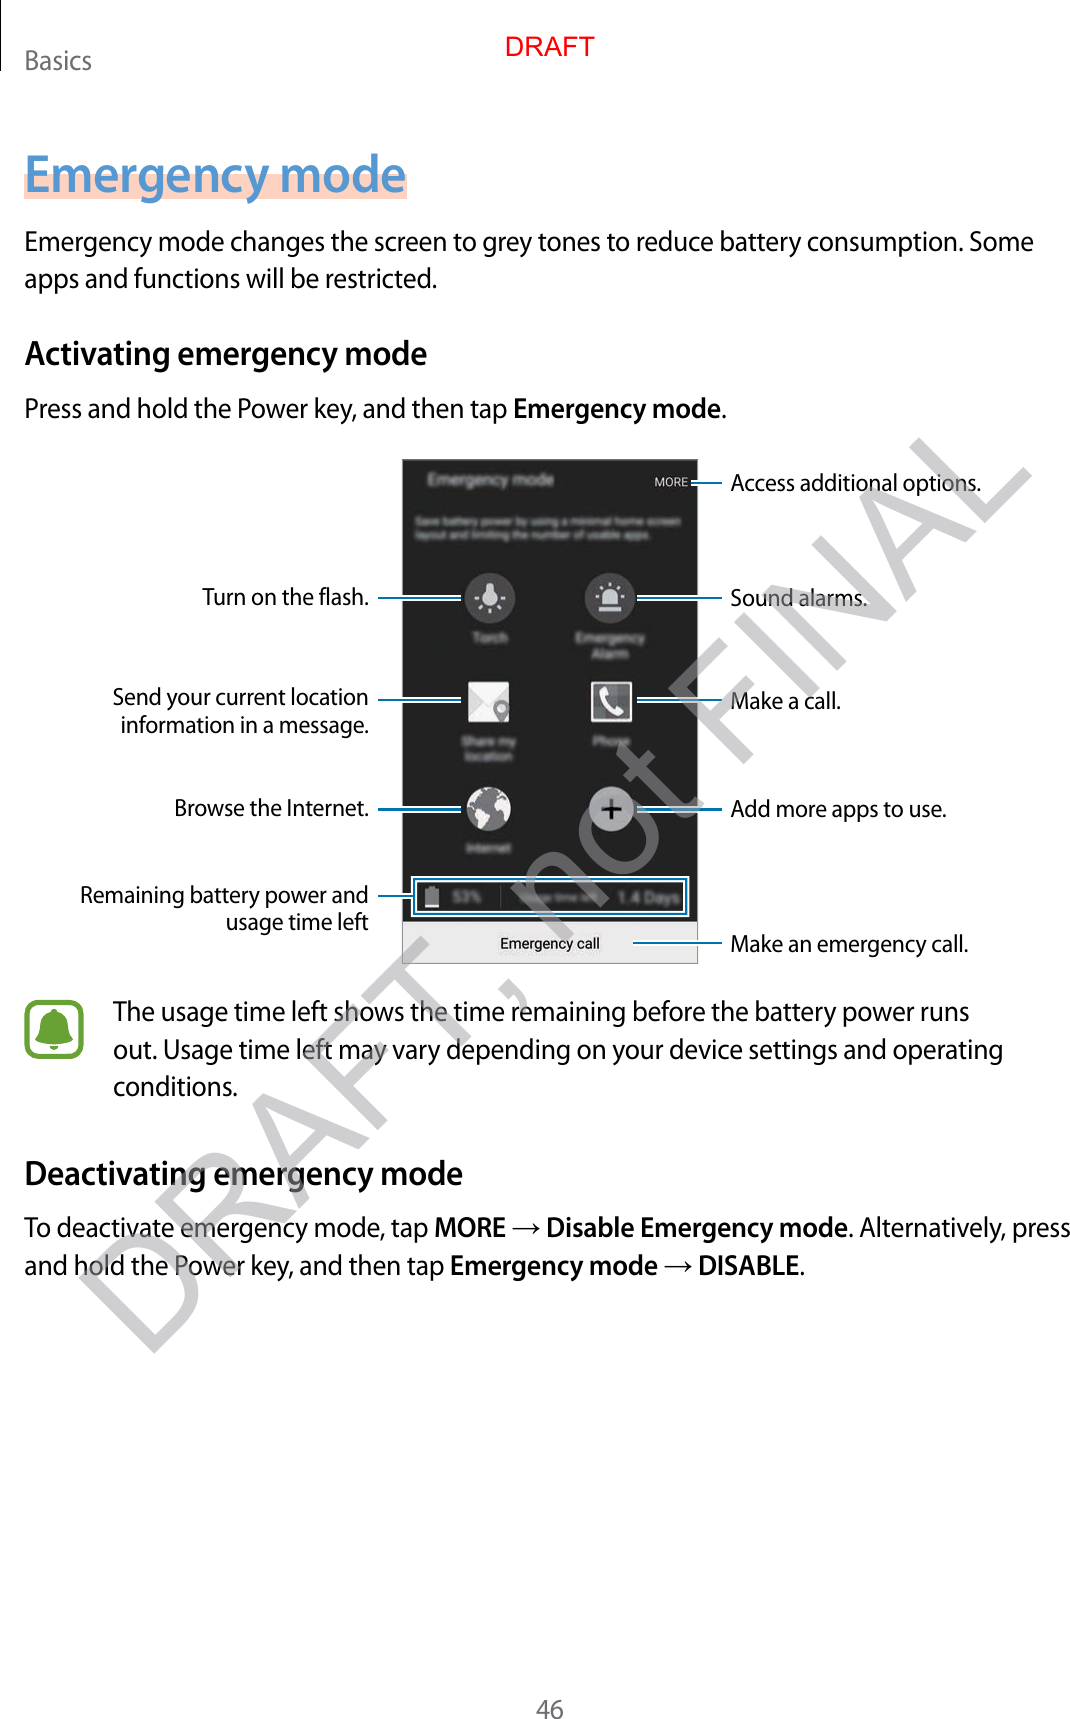 Basics46Emergency modeEmergency mode changes the screen to grey tones to reduce battery consumption. Some apps and functions will be restricted.Activating emergency modePress and hold the Power key, and then tap Emergency mode.Add more apps to use.Make an emergency call.Remaining battery power and usage time leftTurn on the flash.Make a call.Send your current location information in a message.Browse the Internet.Access additional options.Sound alarms.The usage time left shows the time remaining before the battery power runs out. Usage time left may vary depending on your device settings and operating conditions.Deactivating emergency modeTo deactivate emergency mode, tap MORE → Disable Emergency mode. Alternatively, press and hold the Power key, and then tap Emergency mode → DISABLE.DRAFTDRAFT, not FINAL